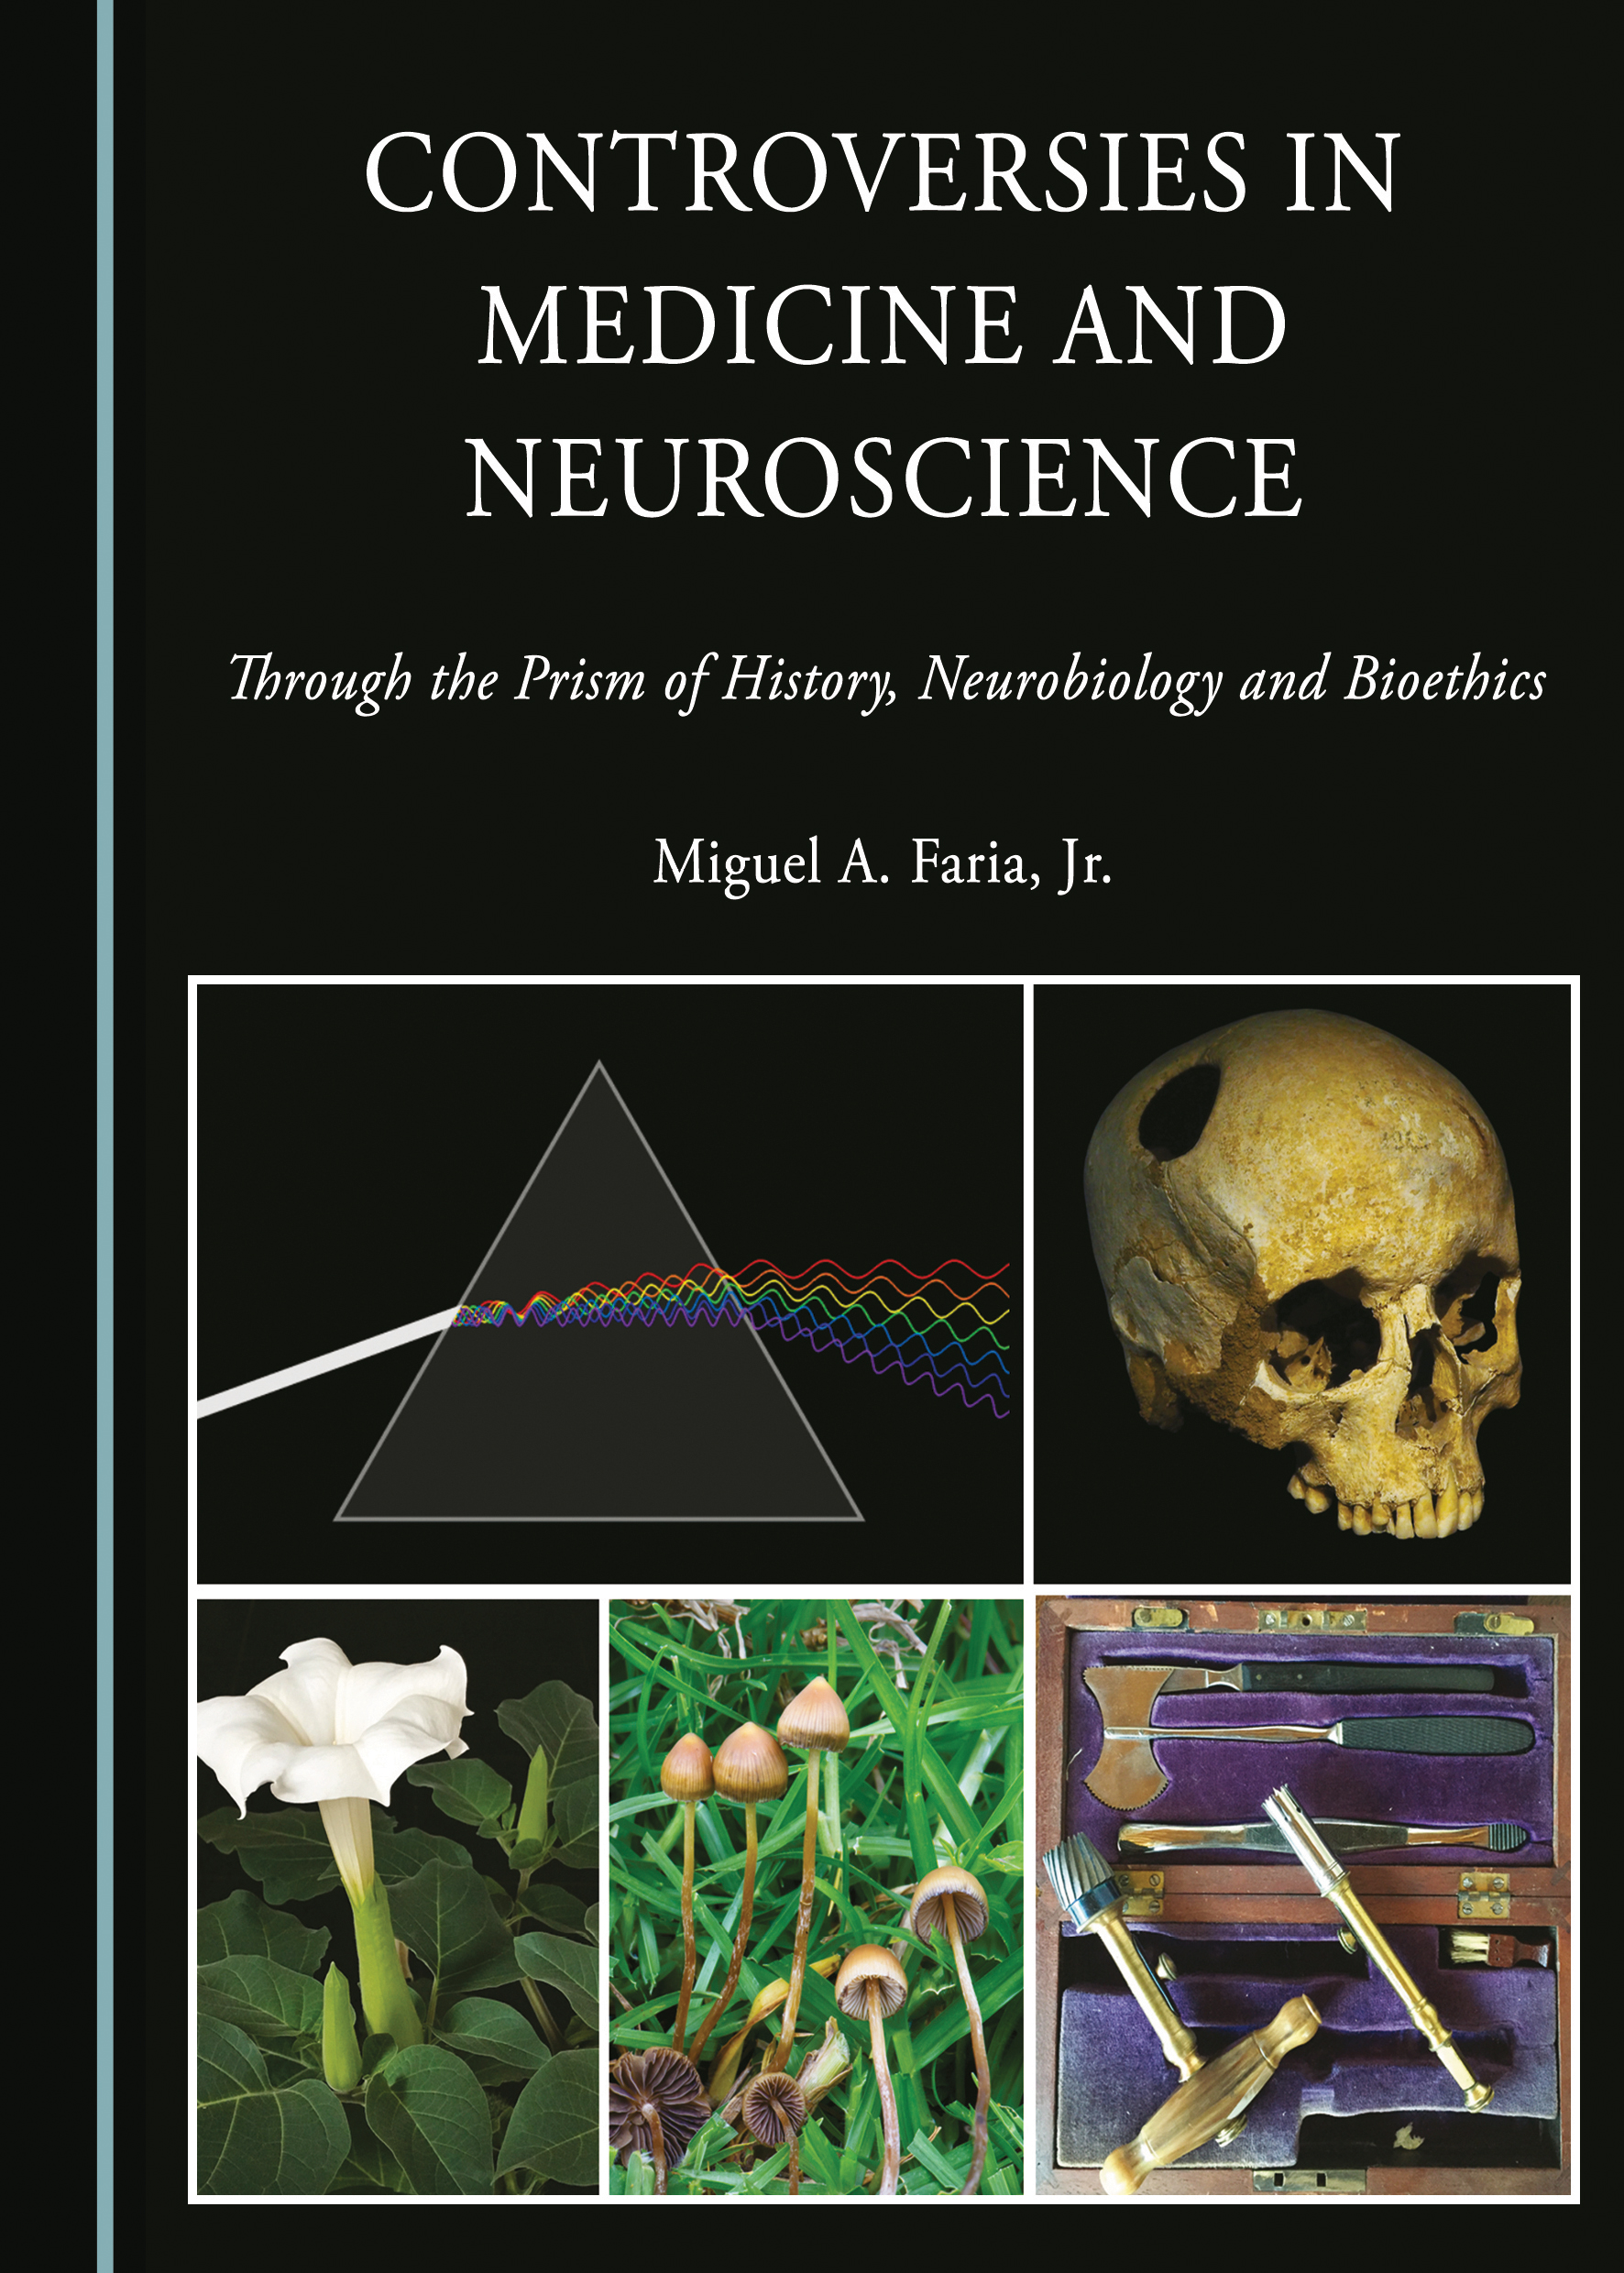 Controversies in Medicine and Neuroscience: Through the Prism of History, Neurobiology and Bioethics